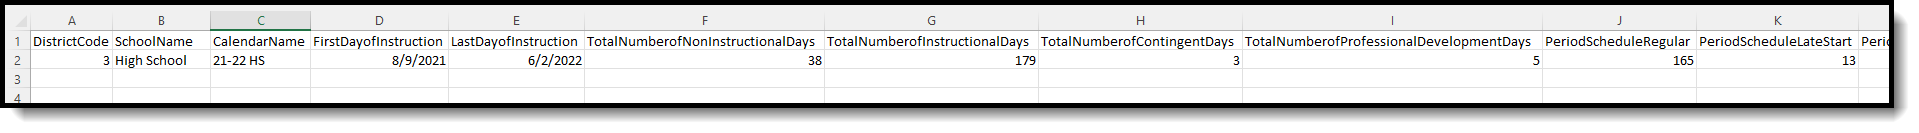 Image of the Calendar Days Report in CSV Format